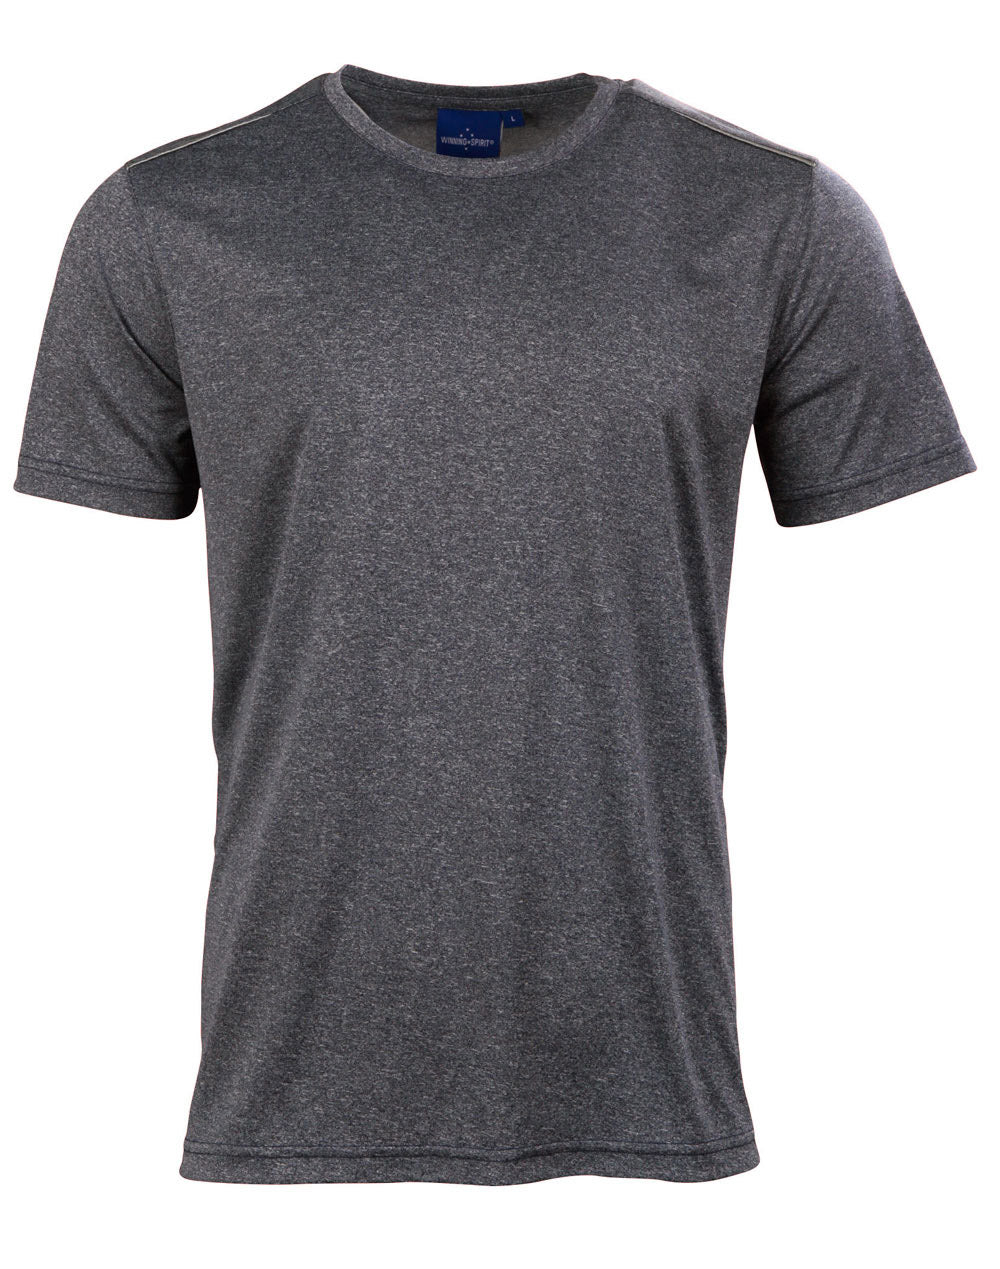 JCTS45 Harland Tee Men's